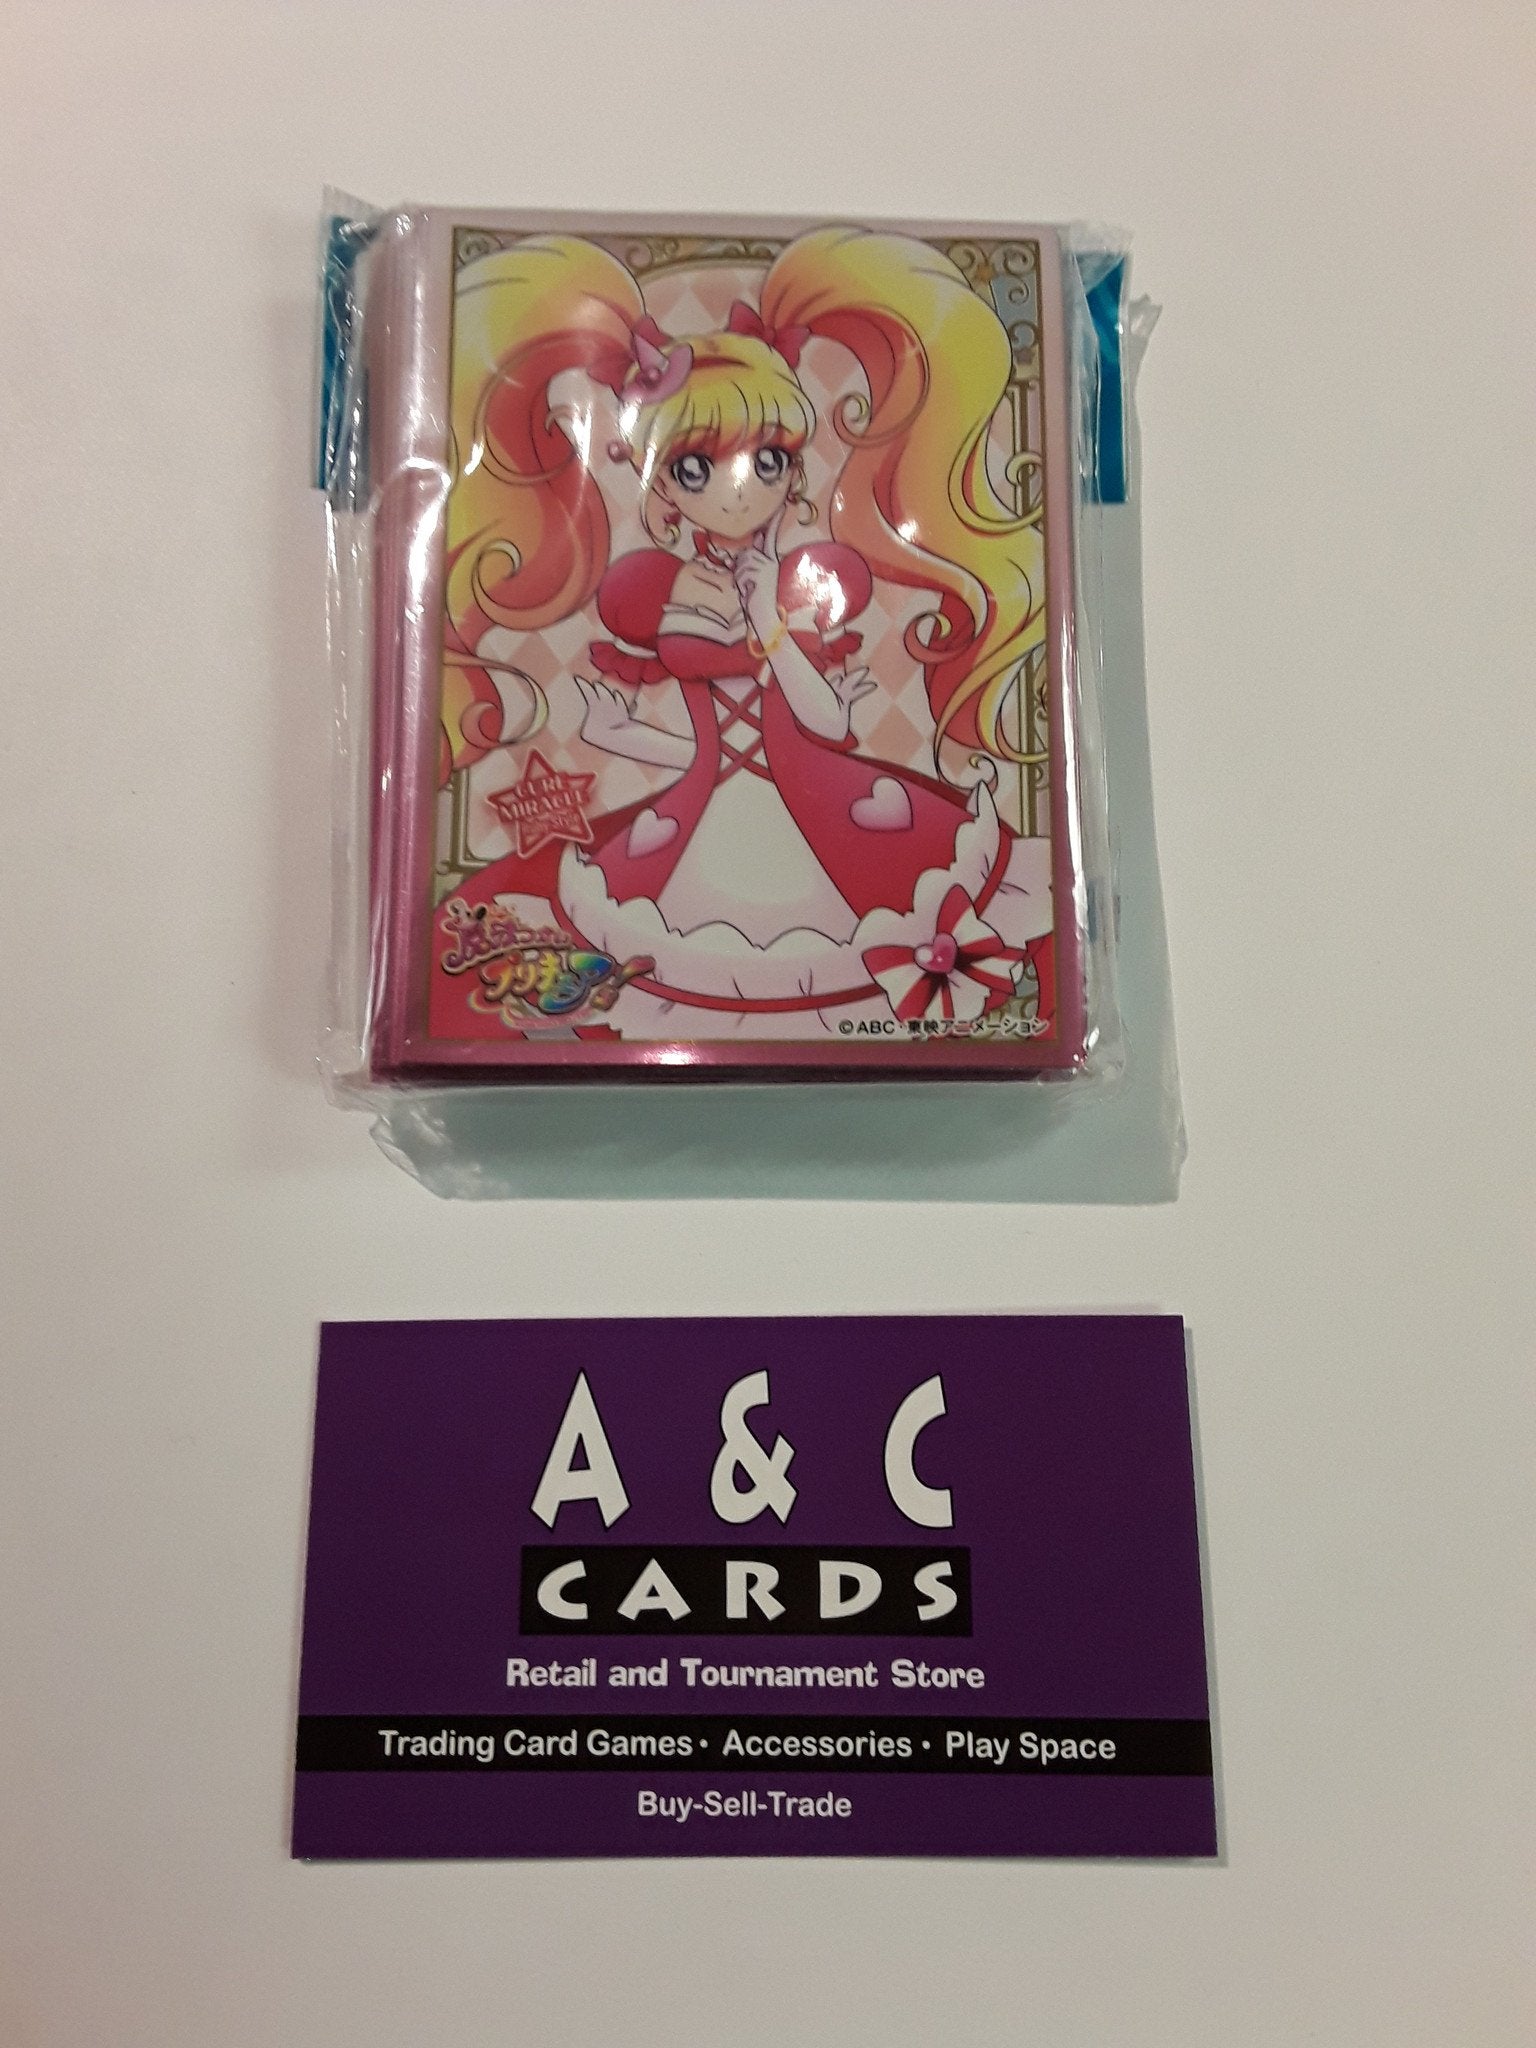 Character Sleeves "Magic Girls Precure" #2 - 1 pack of Standard Size Sleeves 65pc. - Magic Girls Precure